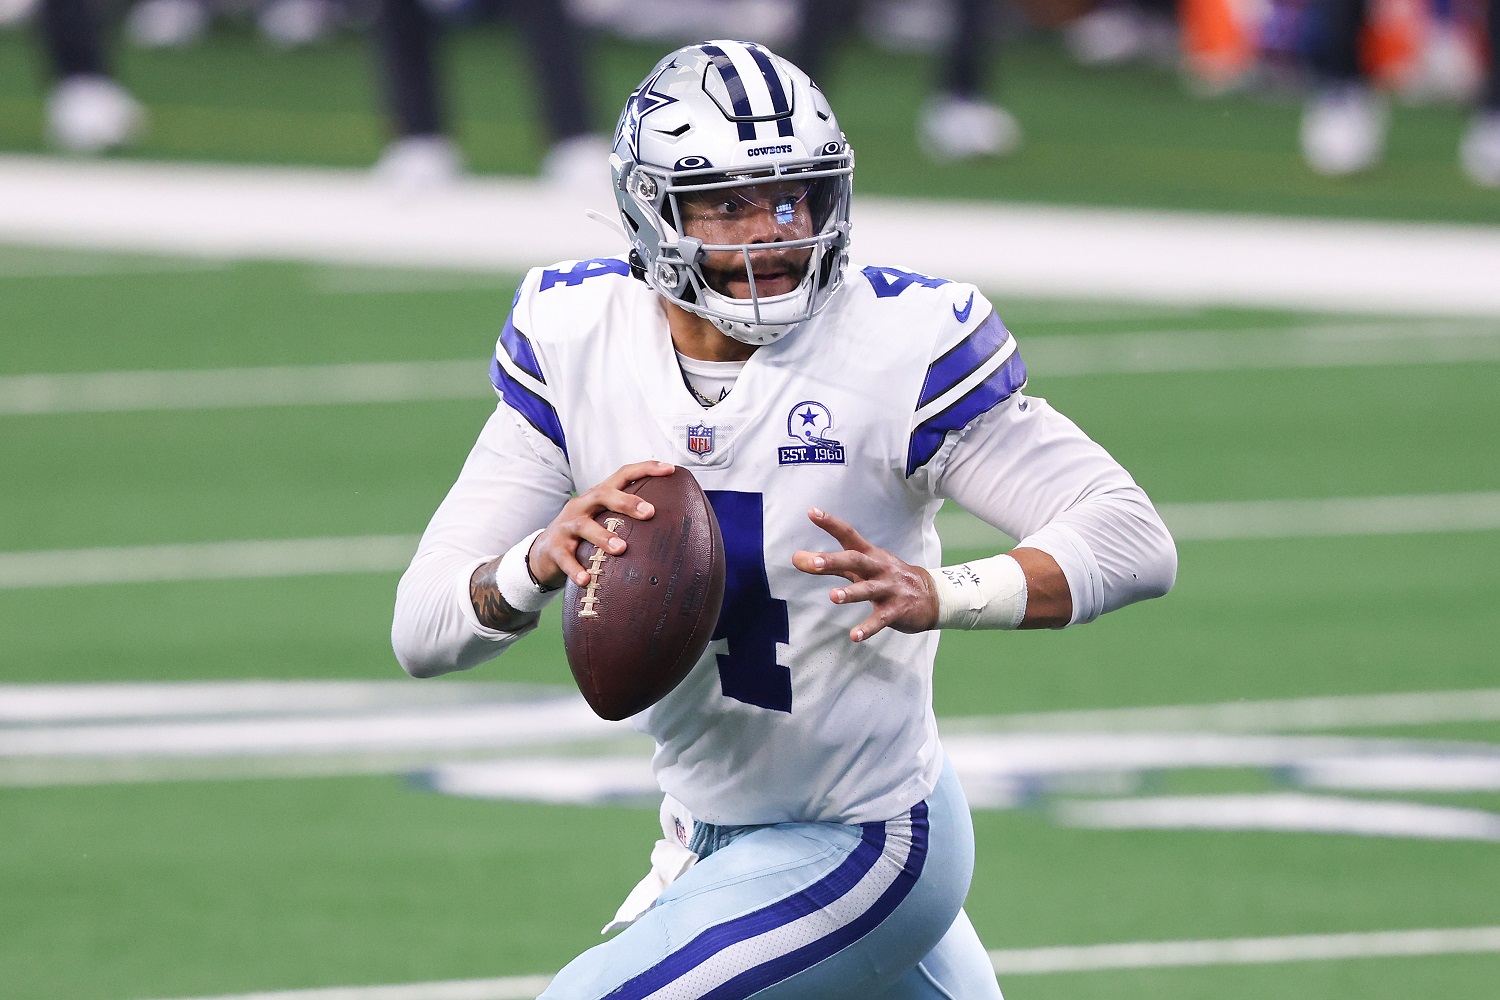 Dak Prescott of the Dallas Cowboys attempts a pass against the New York Giants during the second quarter on Oct. 11, 2020.